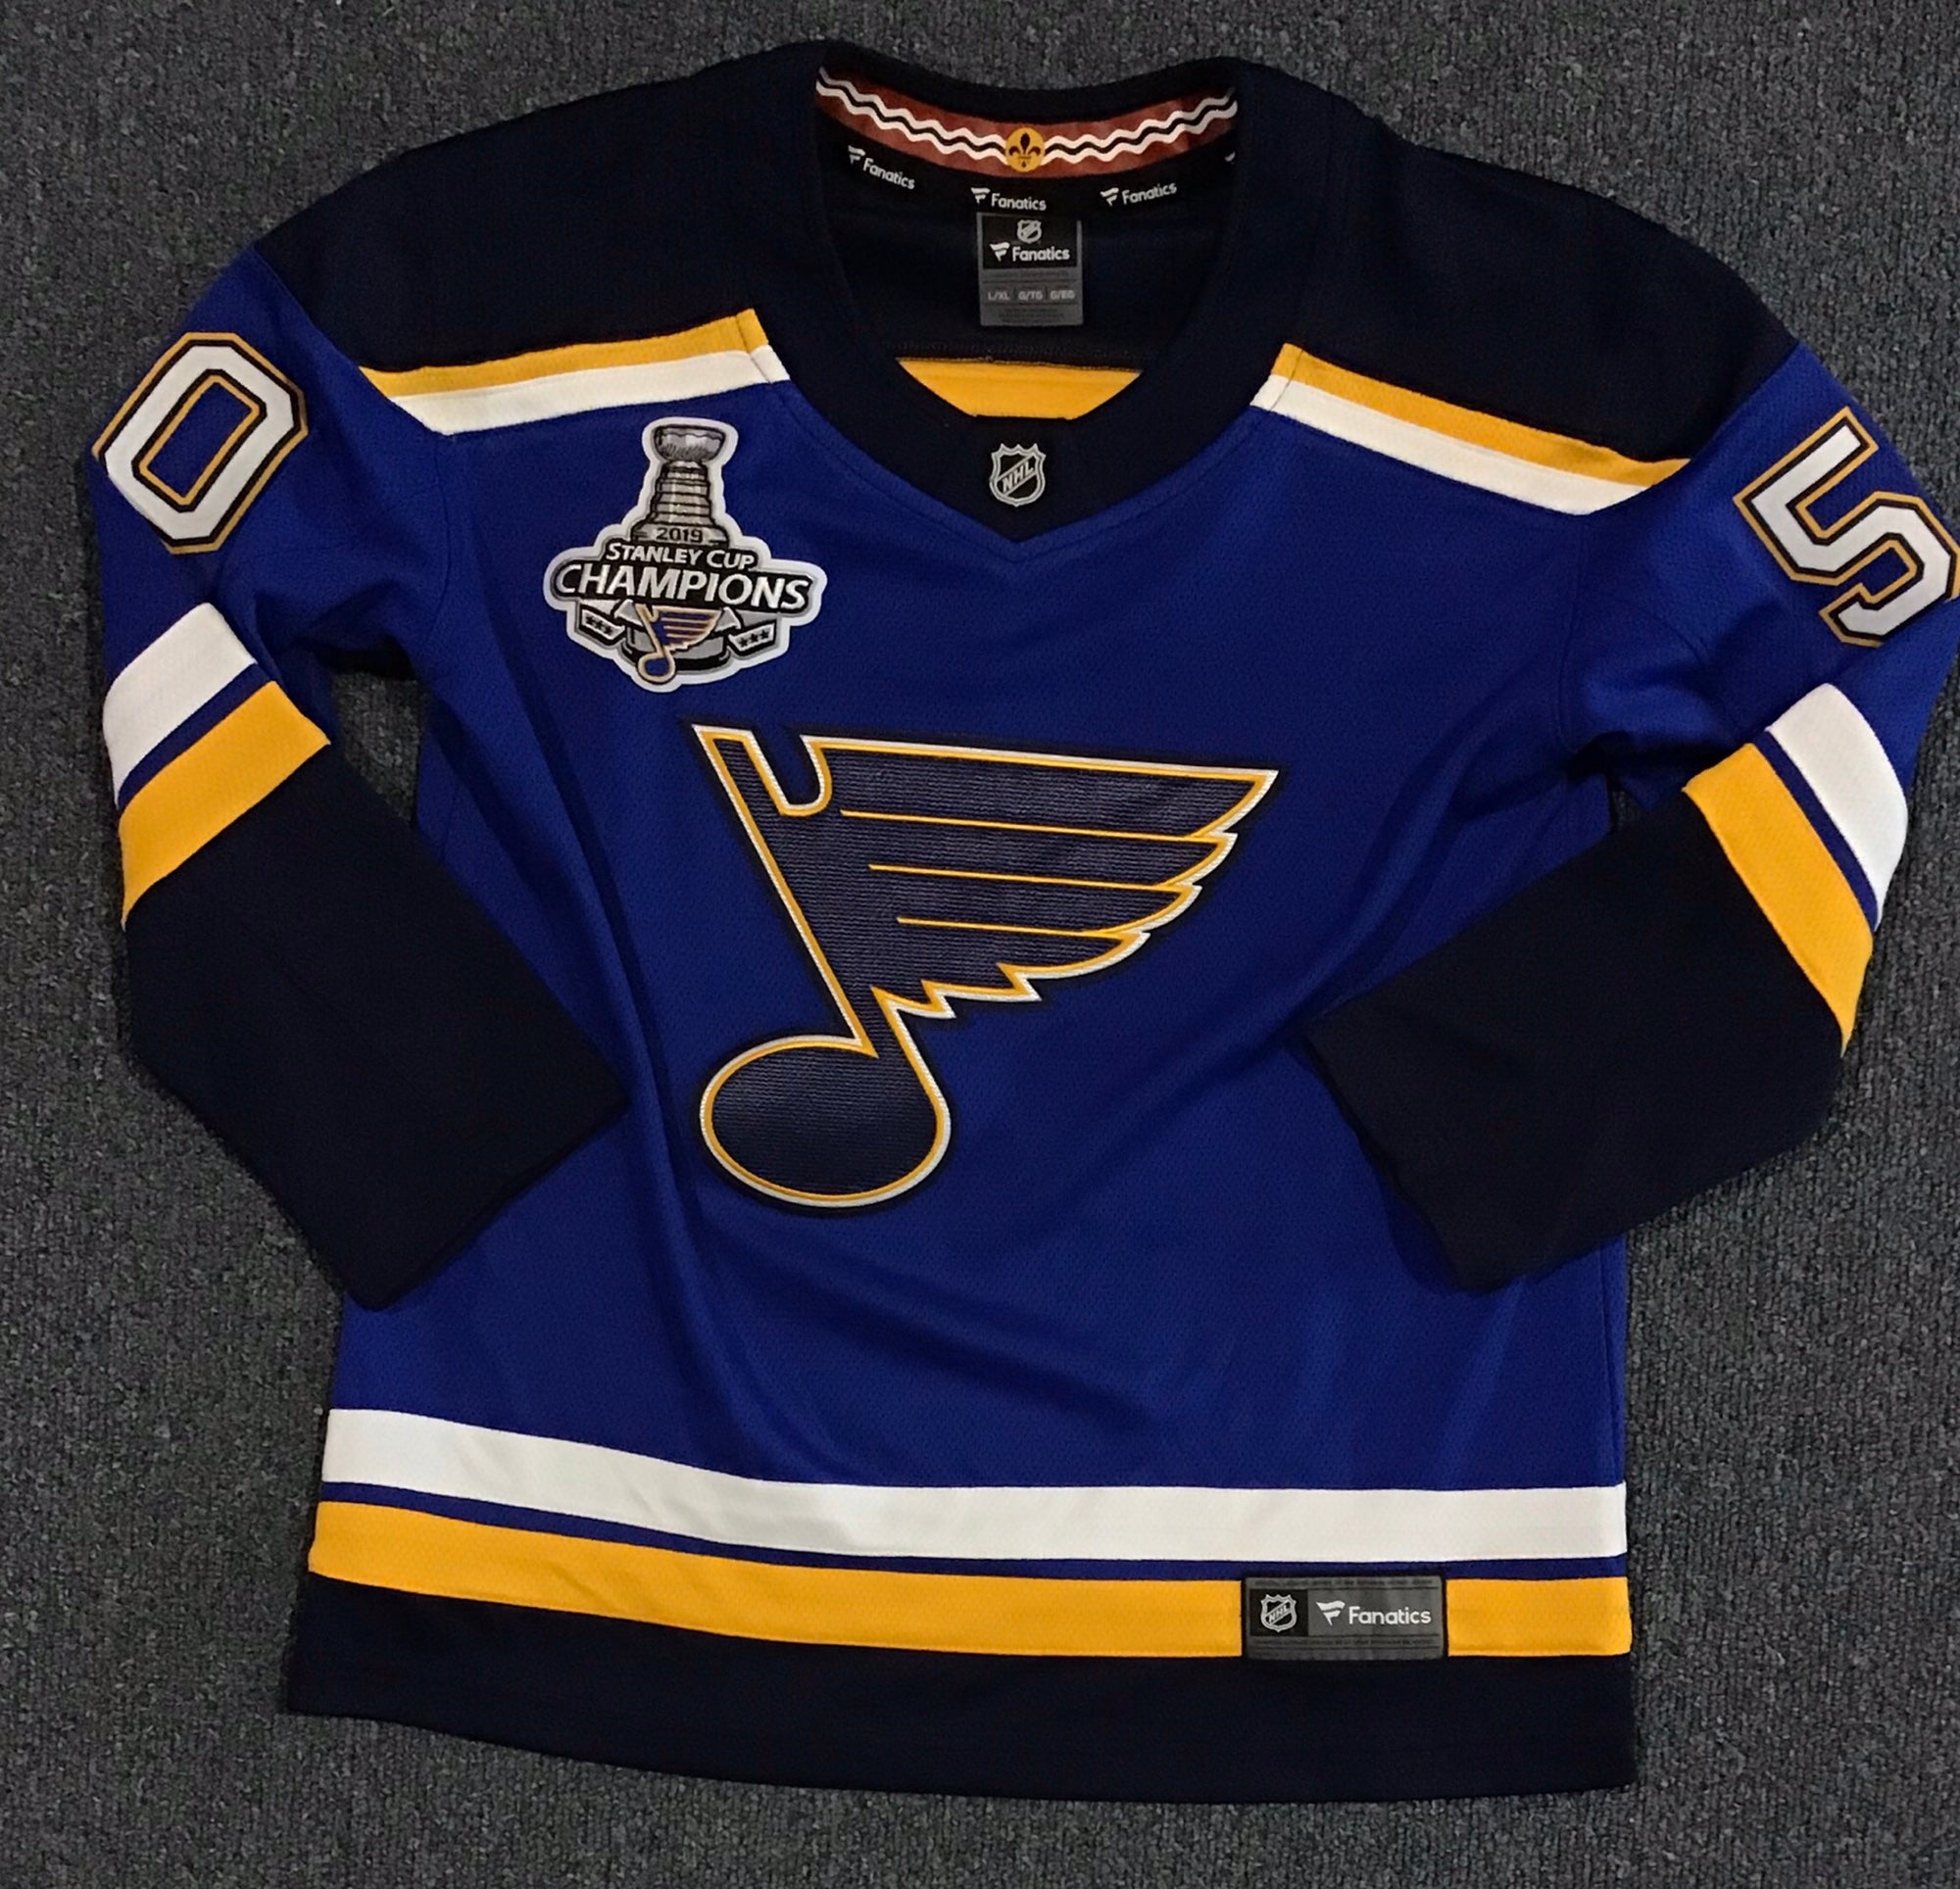 NHL Youth St. Louis Blues Premier Home Blank Jersey